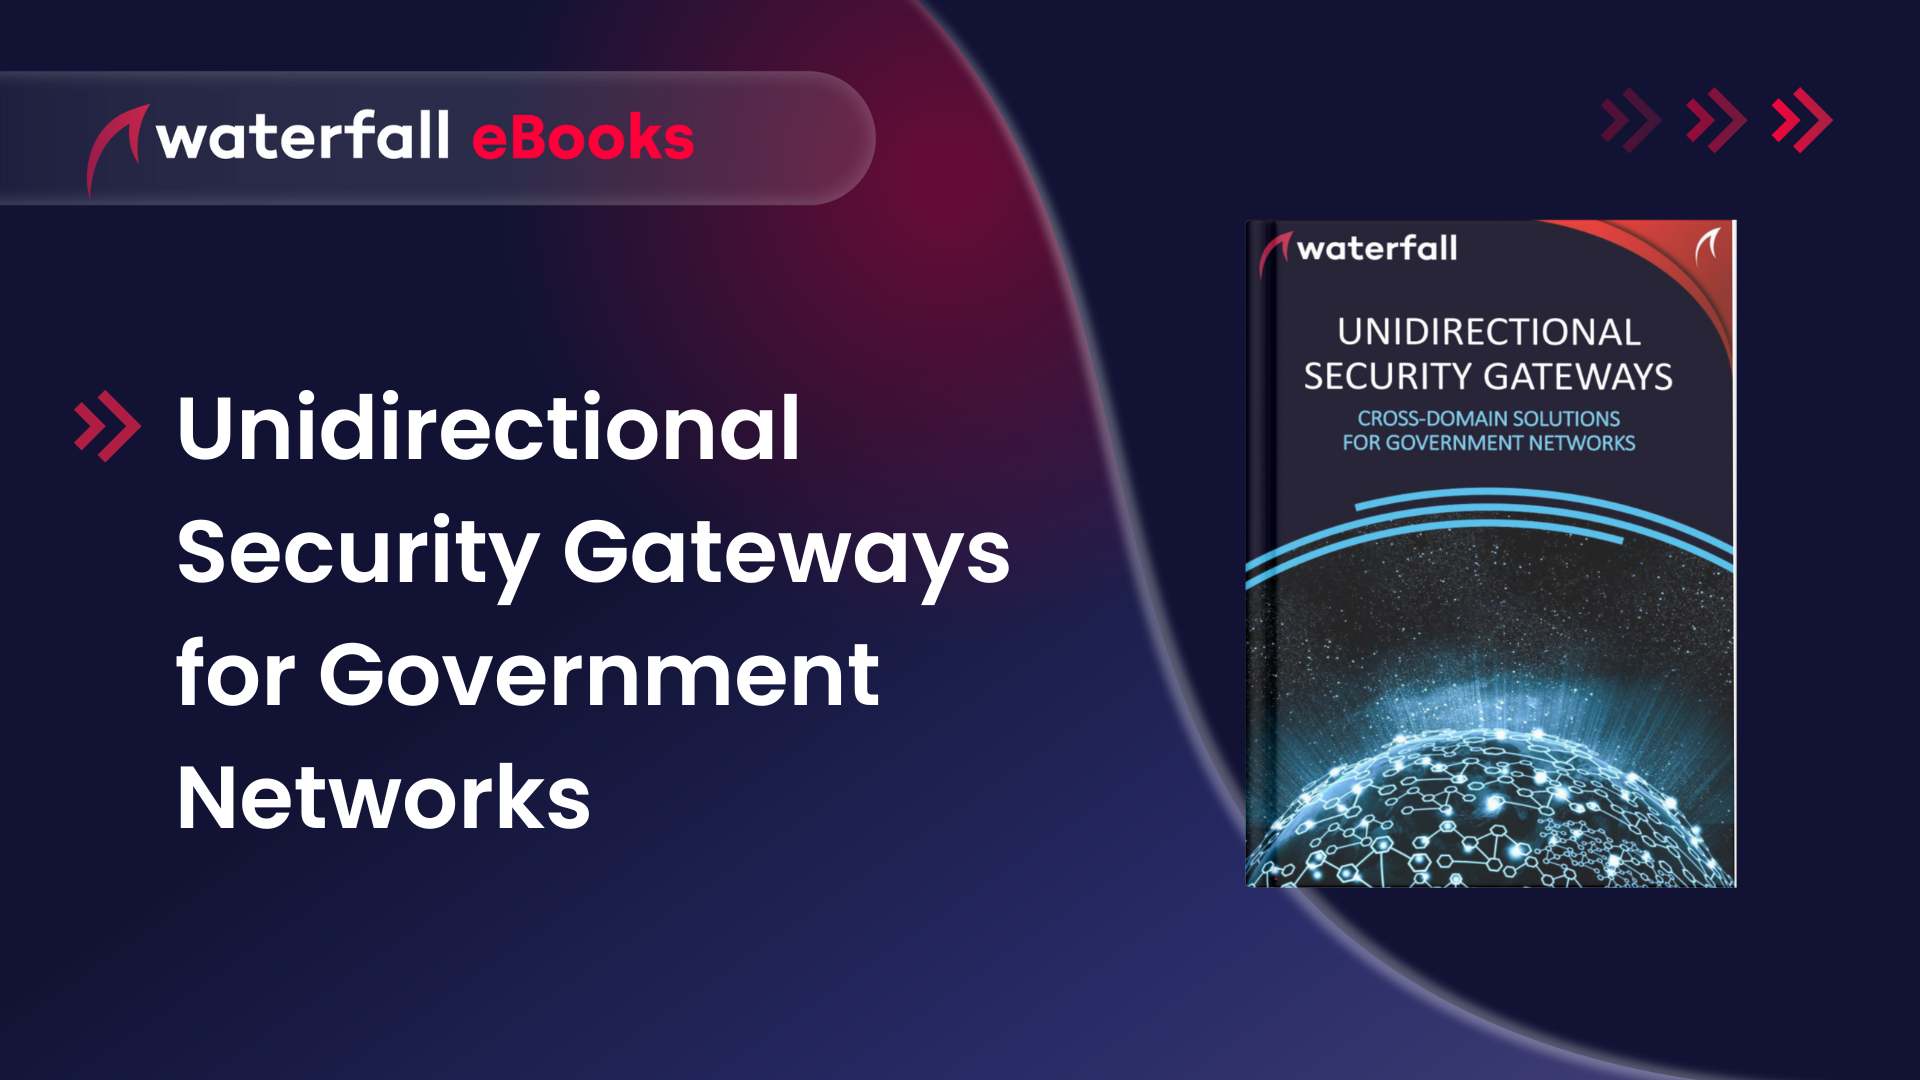 ebook on how to protect government networks from cyberthreats